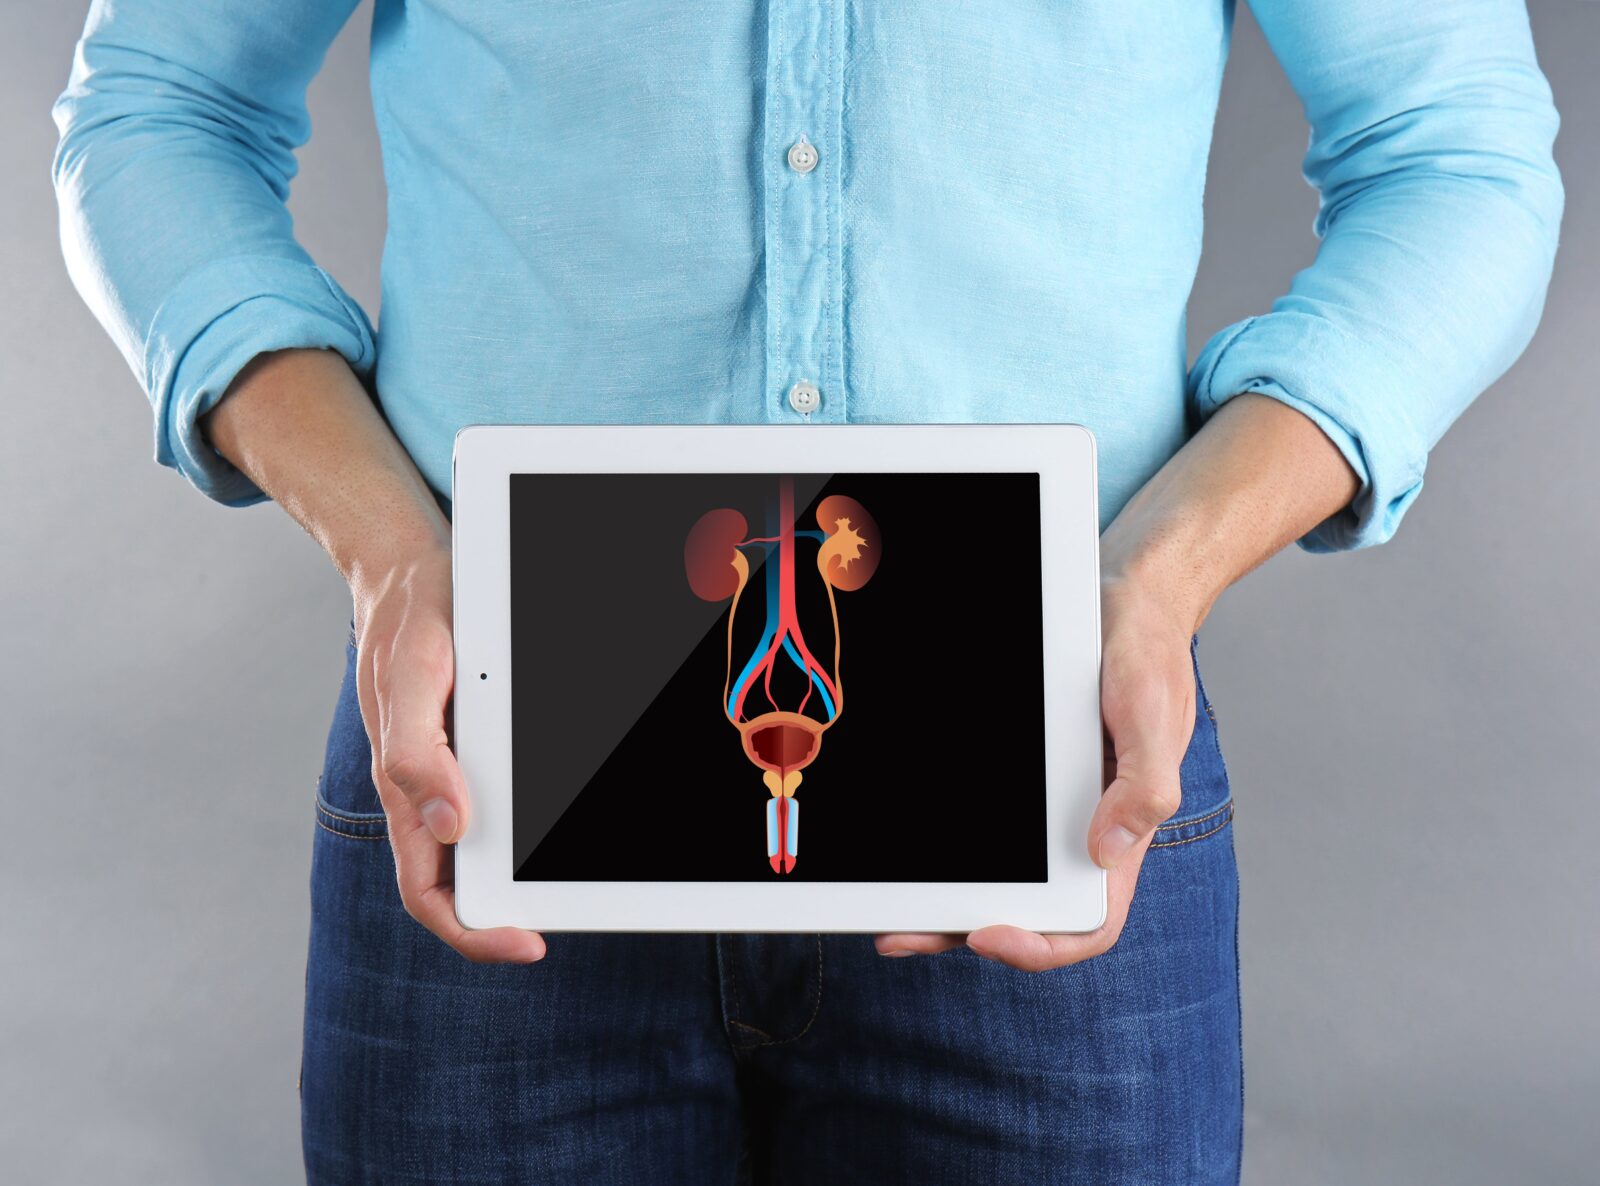 man holding a tablet over abdomen showing urinary anatomy